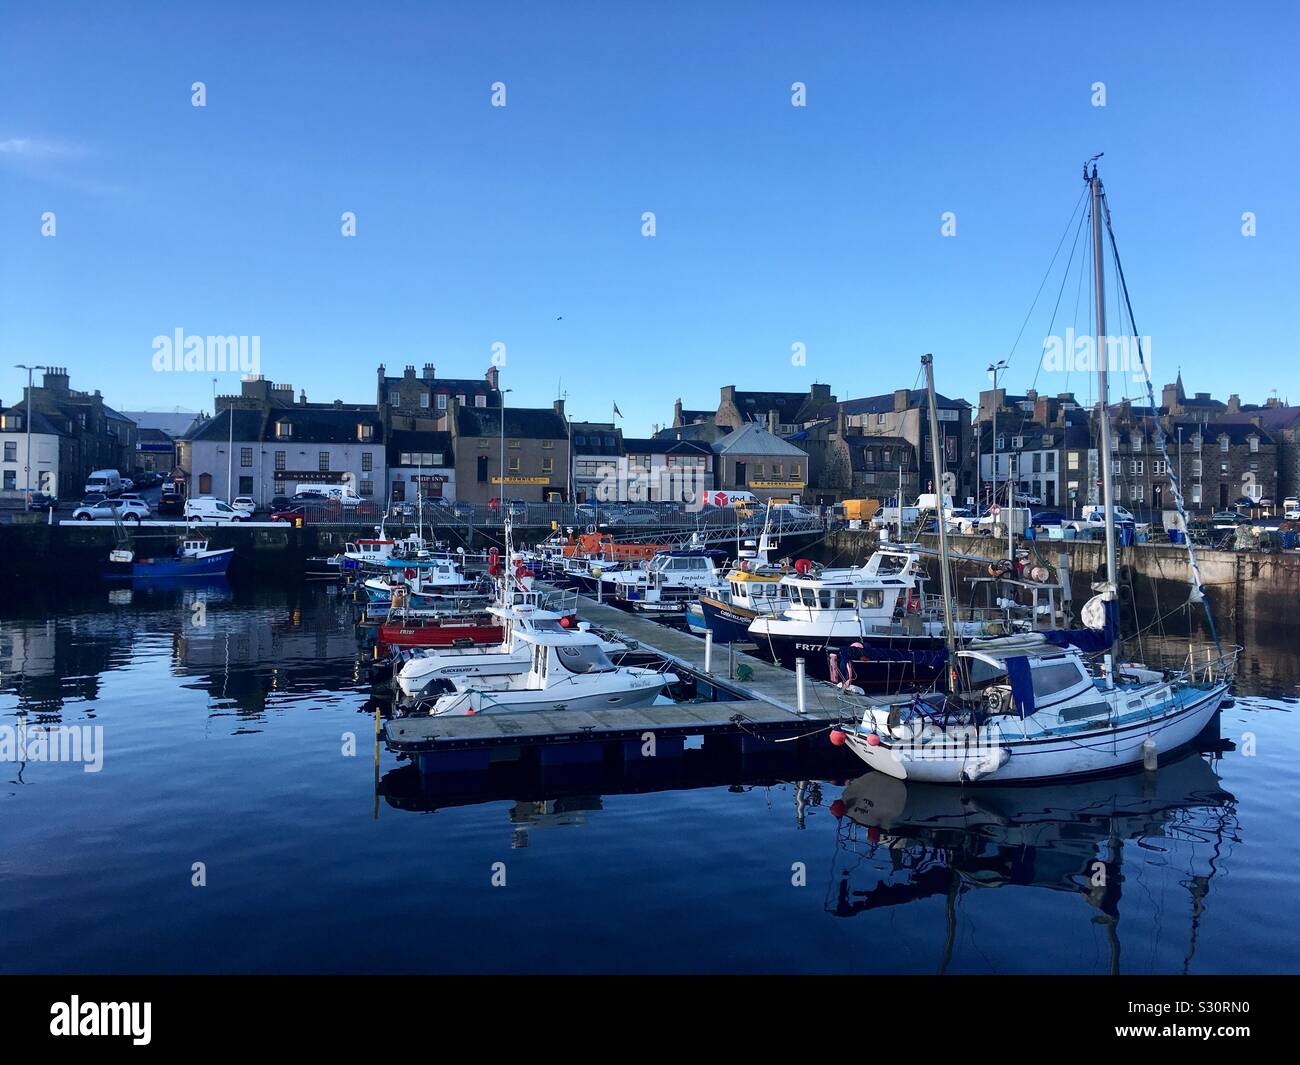 Boats moored in Fraserburgh Harbour, Scotland Stock Photo